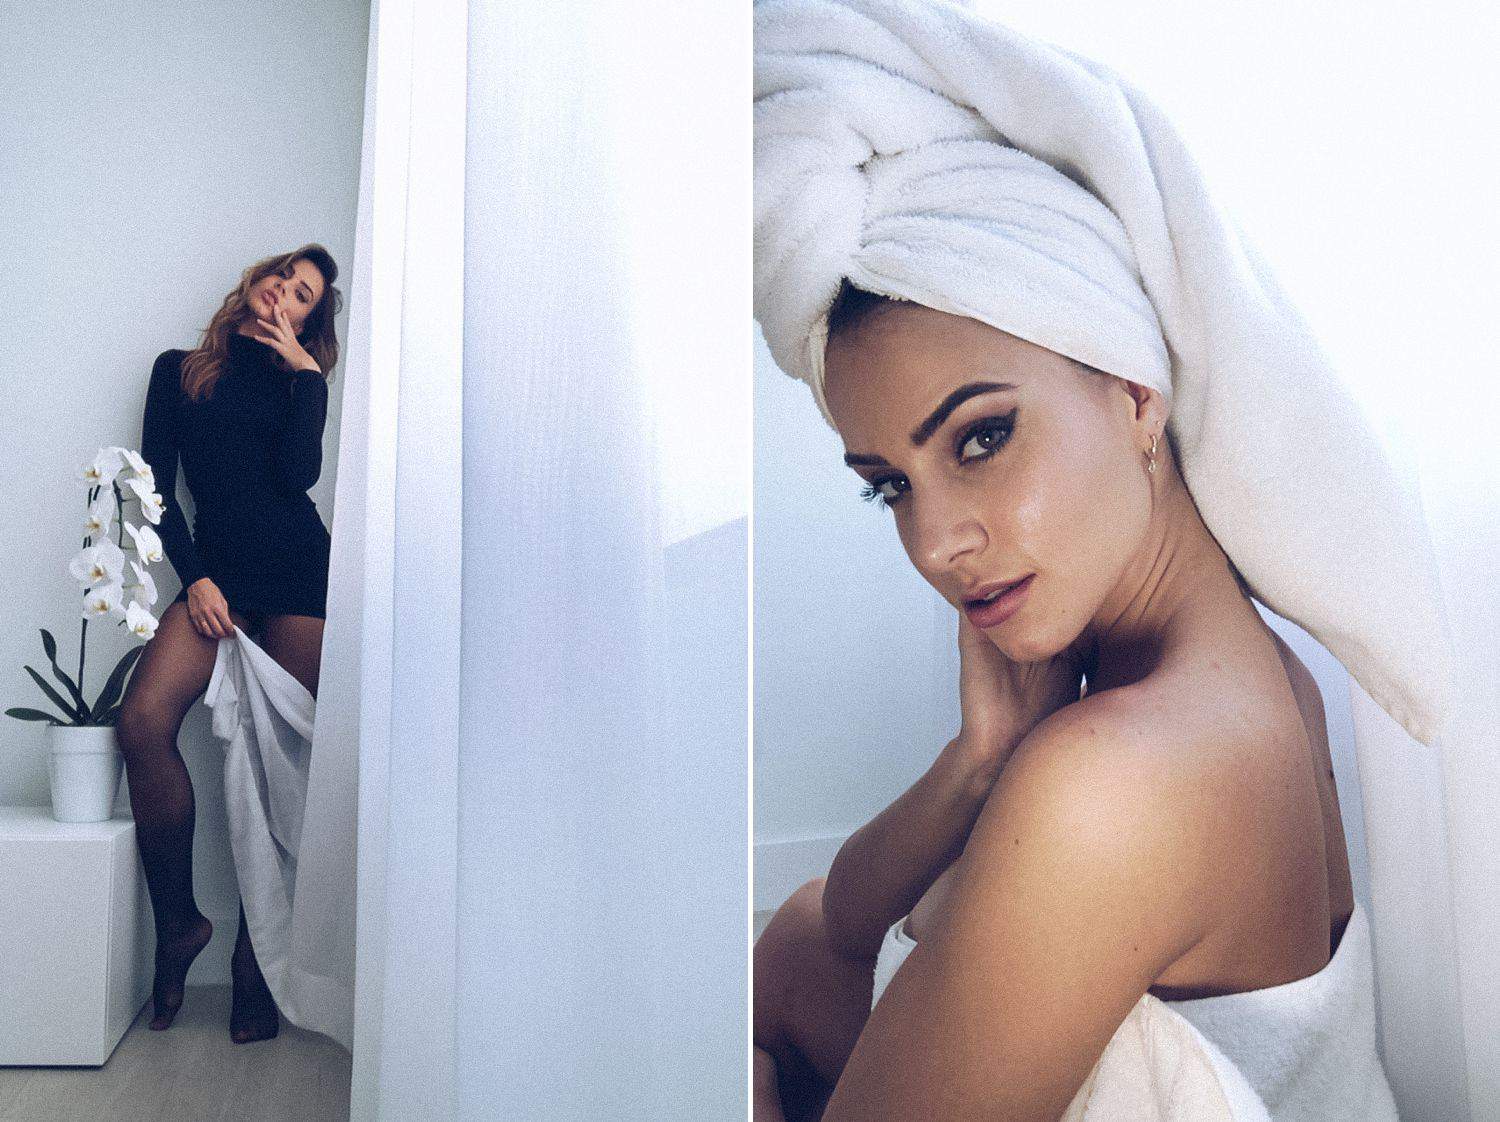 A model poses in a black dress and in a towel wrap for two FaceTime photos shot by Lauren Alexis